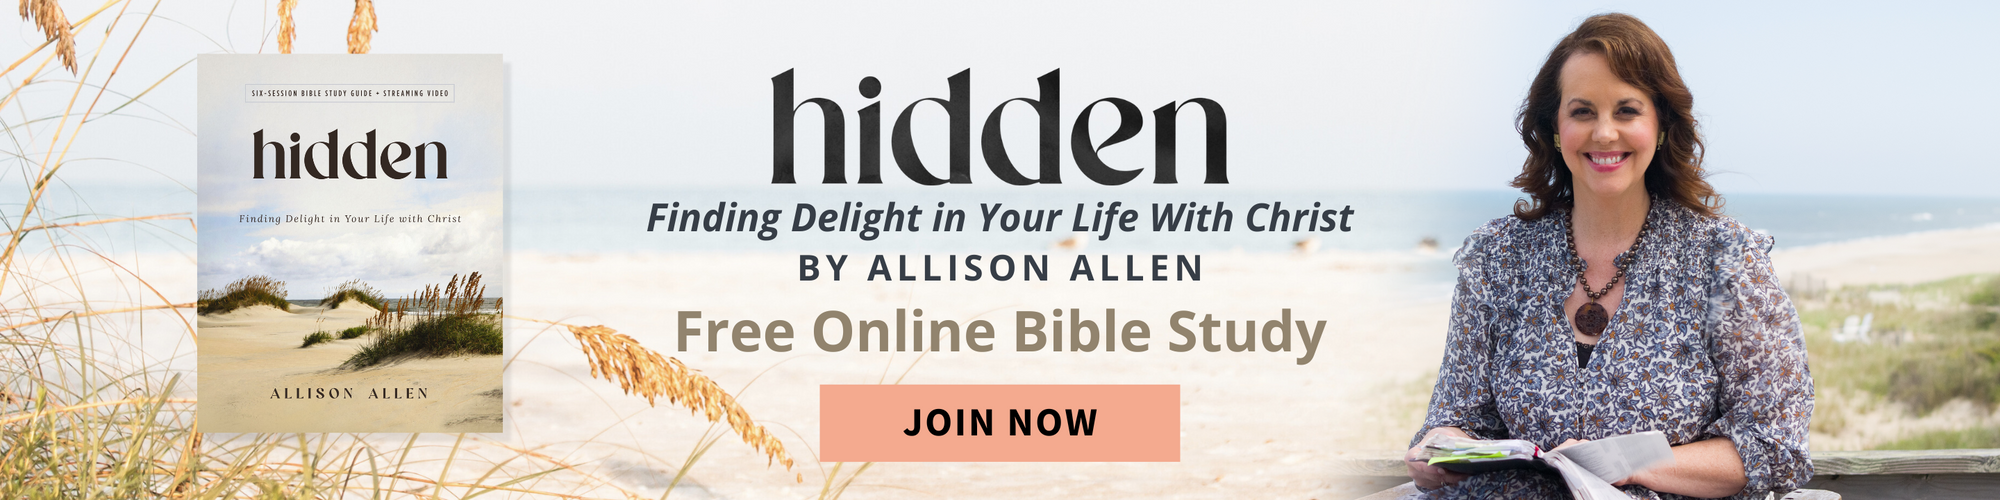 Hidden, Finding Delight in Your Life with Christ by Allison Allen, Free Online Bible Study, Join Now